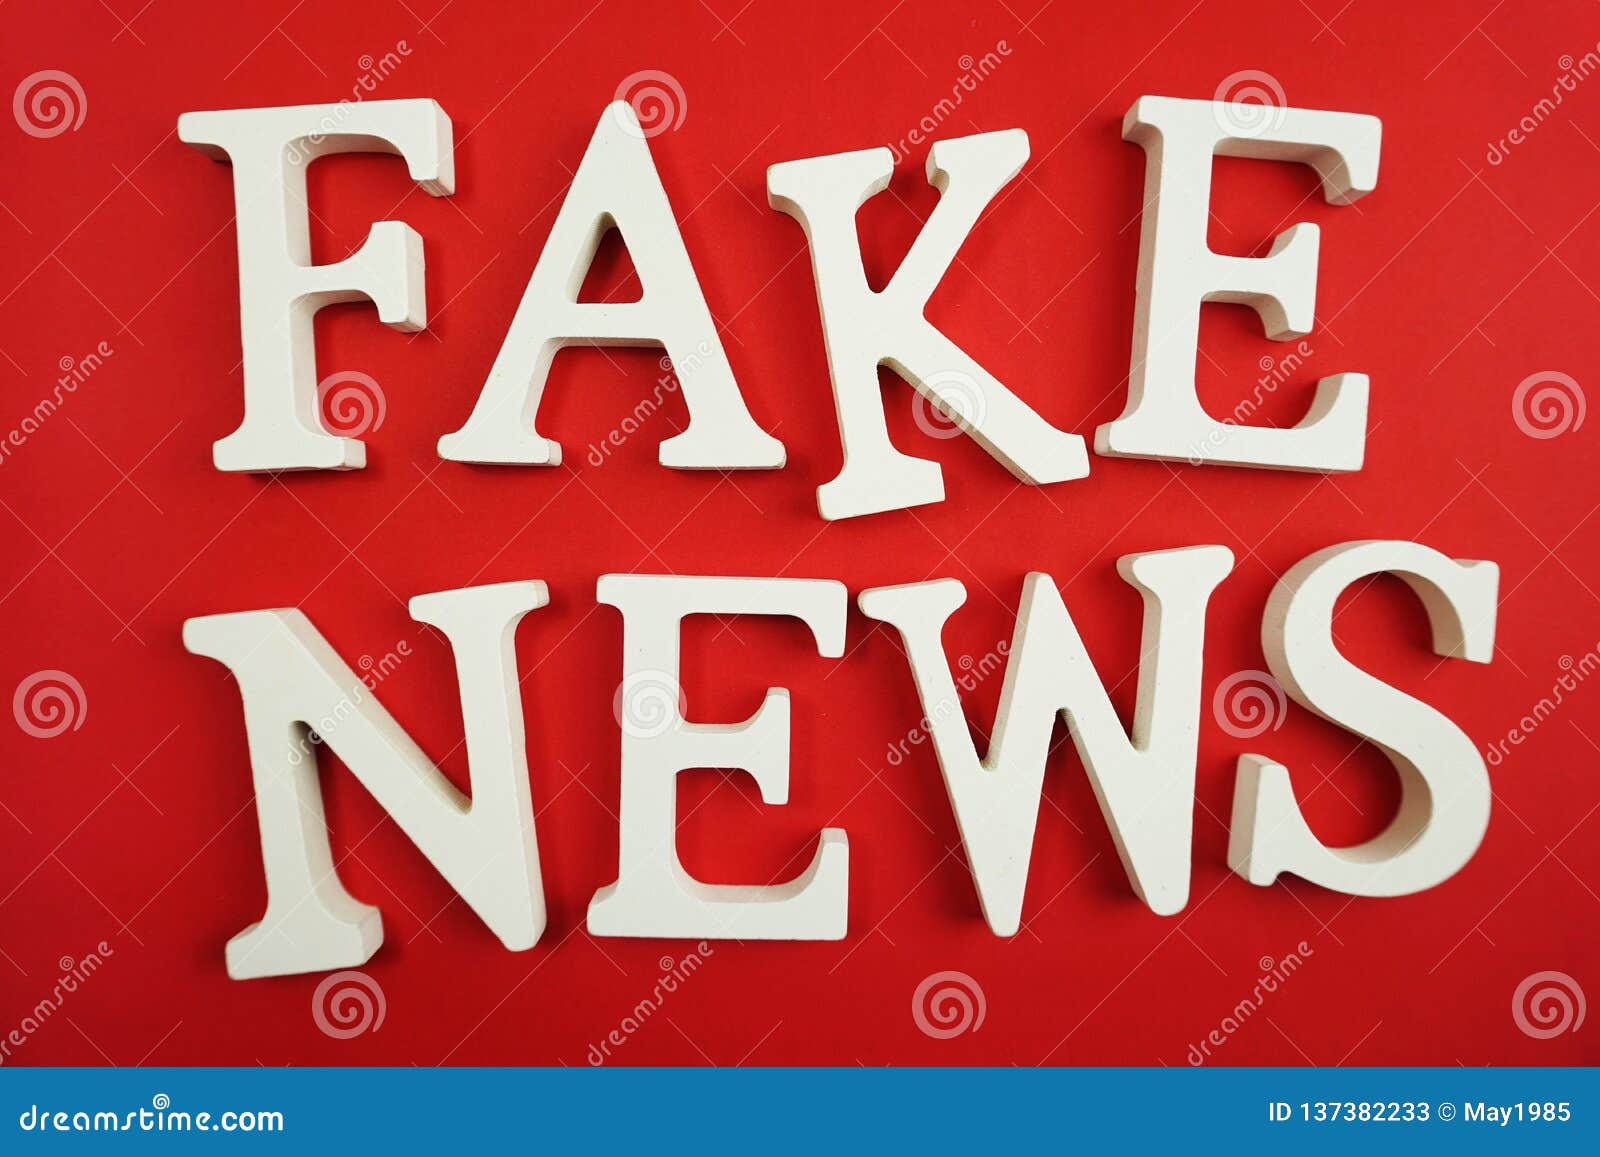 Fake News Word Alphabet Letters on Red Background Stock Image - Image ...